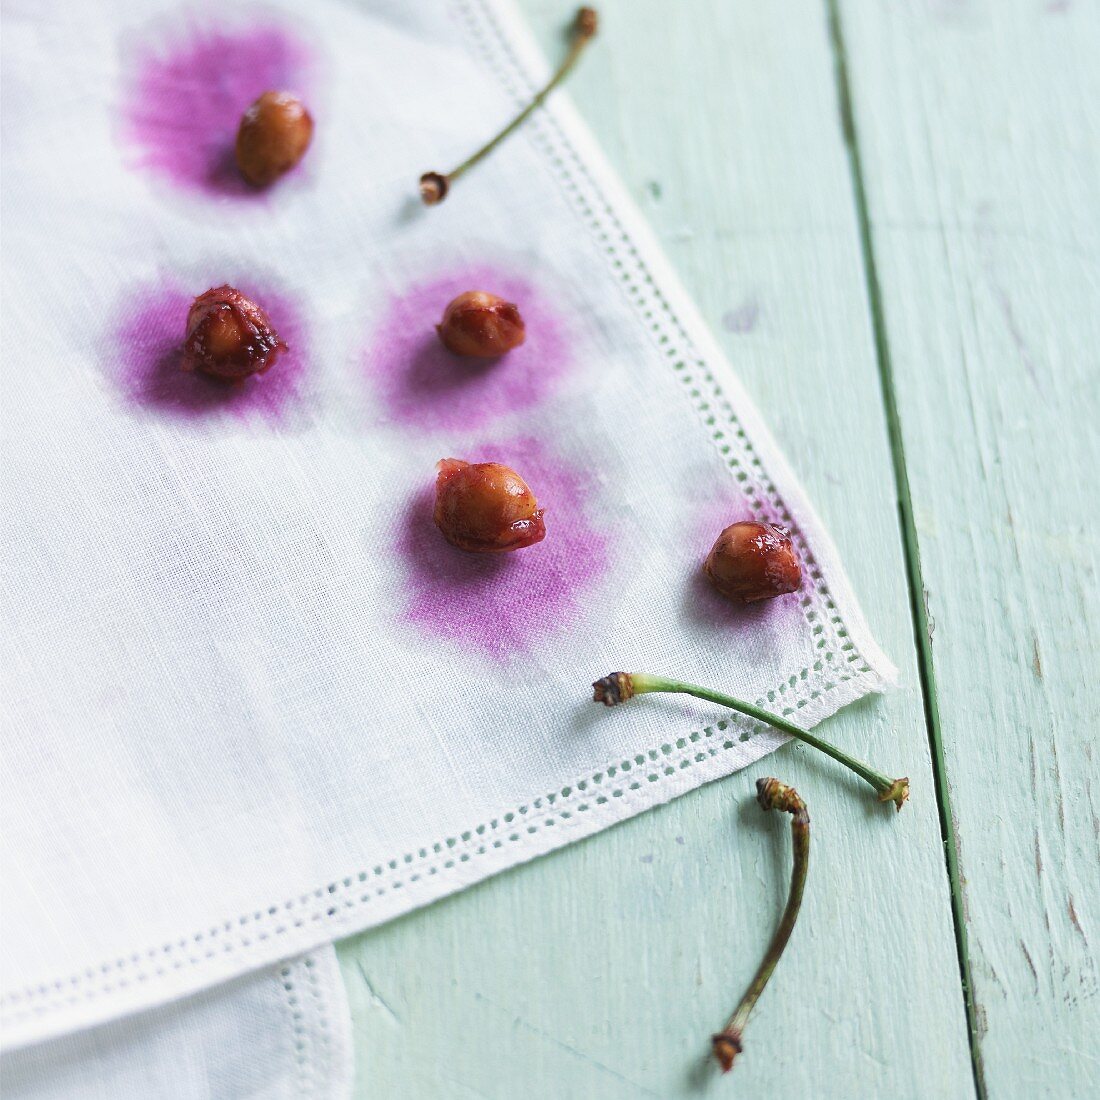 Cherry stones and stems on a white cloth